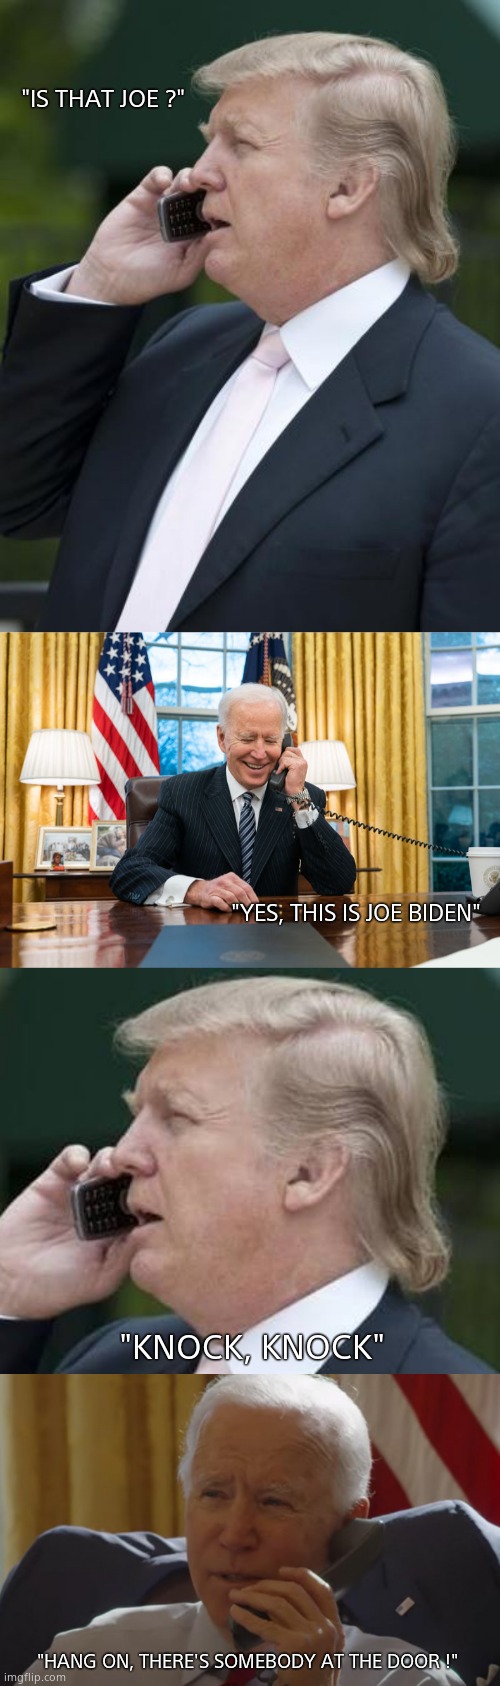 Knock Knock, who's there ? Joe's not. | "IS THAT JOE ?" "YES, THIS IS JOE BIDEN" "KNOCK, KNOCK" "HANG ON, THERE'S SOMEBODY AT THE DOOR !" | image tagged in memes,trump,biden,phone call,knock knock,political meme | made w/ Imgflip meme maker